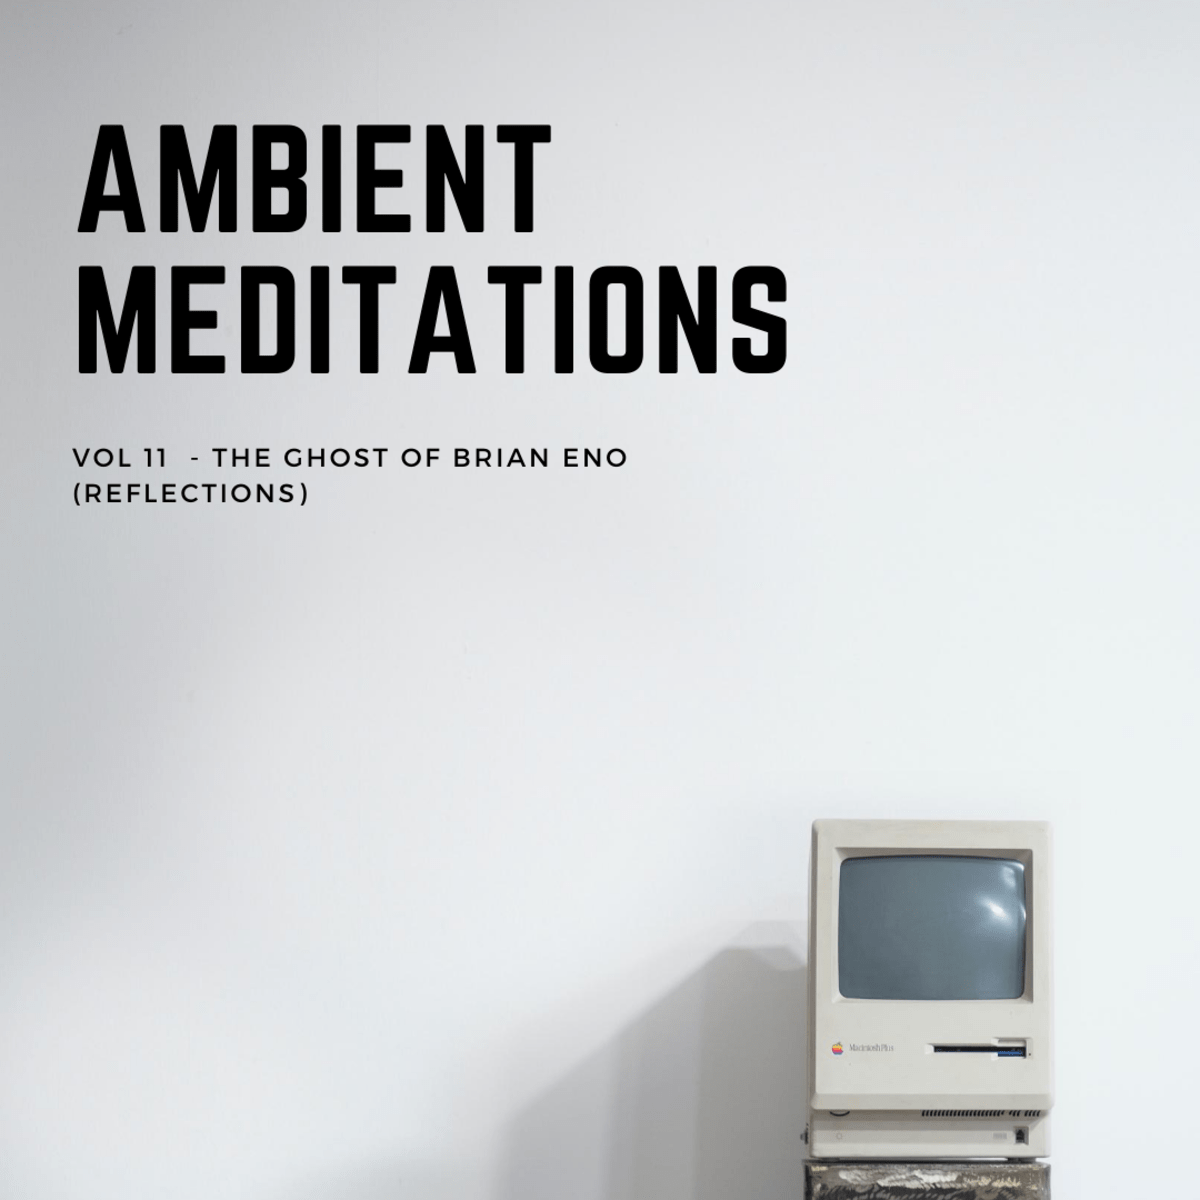 Ambient Meditations Vol. 11 – The Ghost of Brian Eno (Reflections)